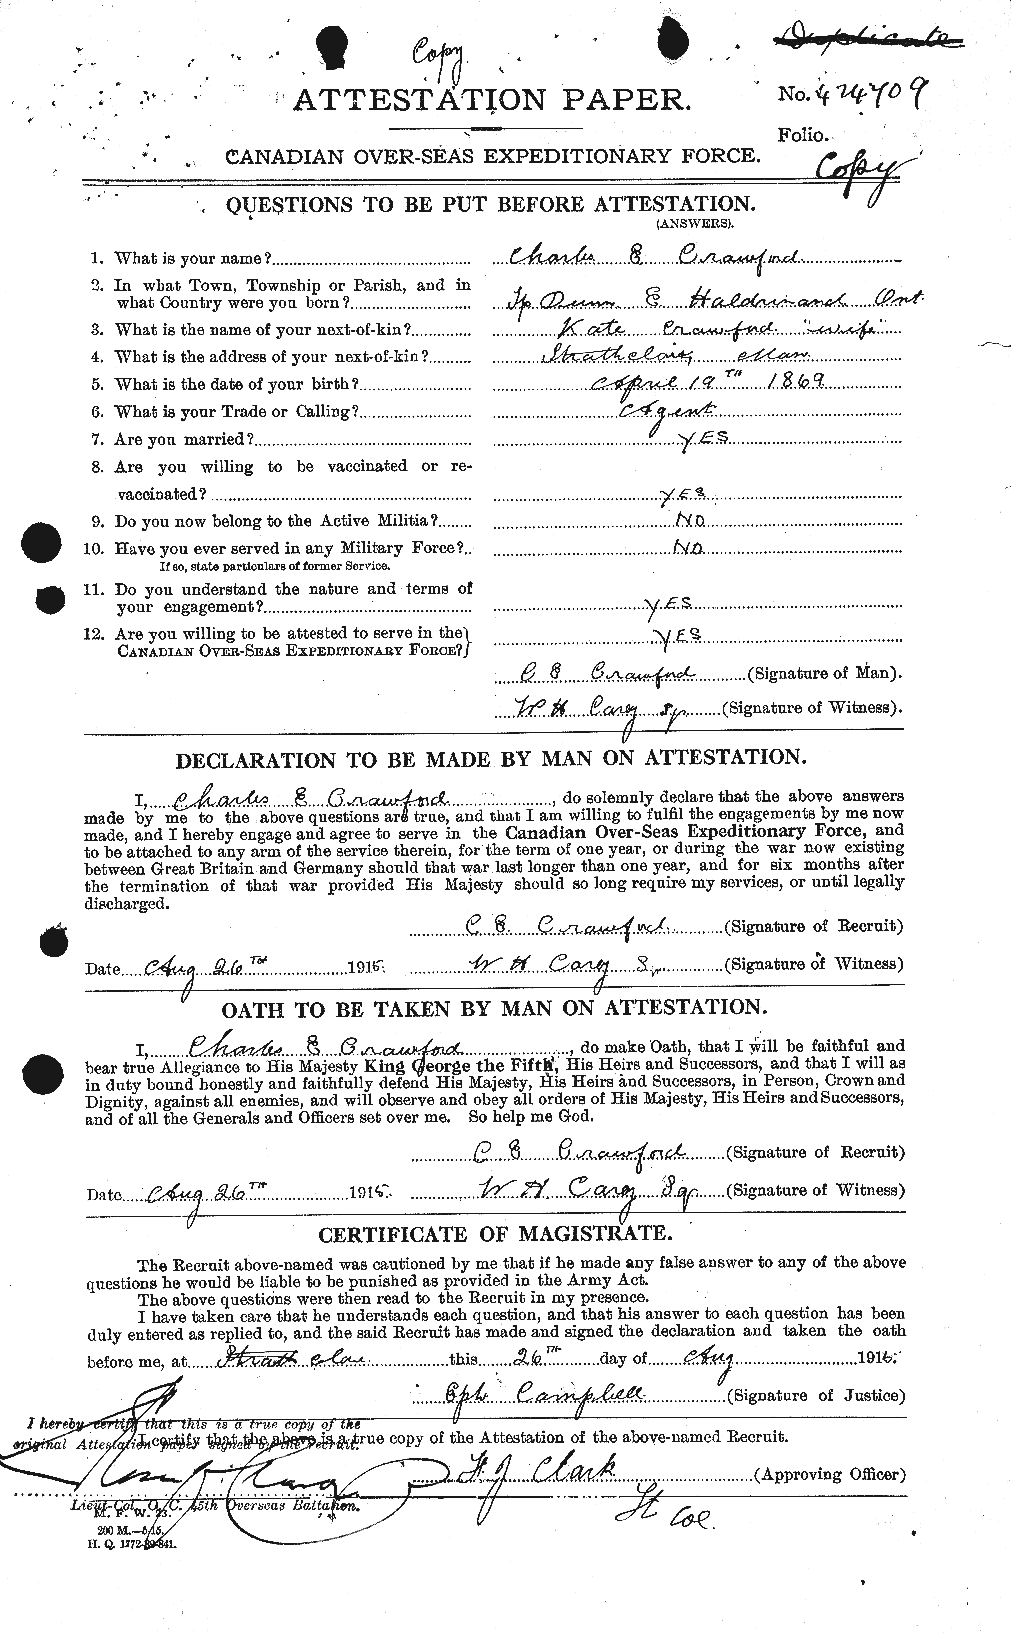 Personnel Records of the First World War - CEF 060841a